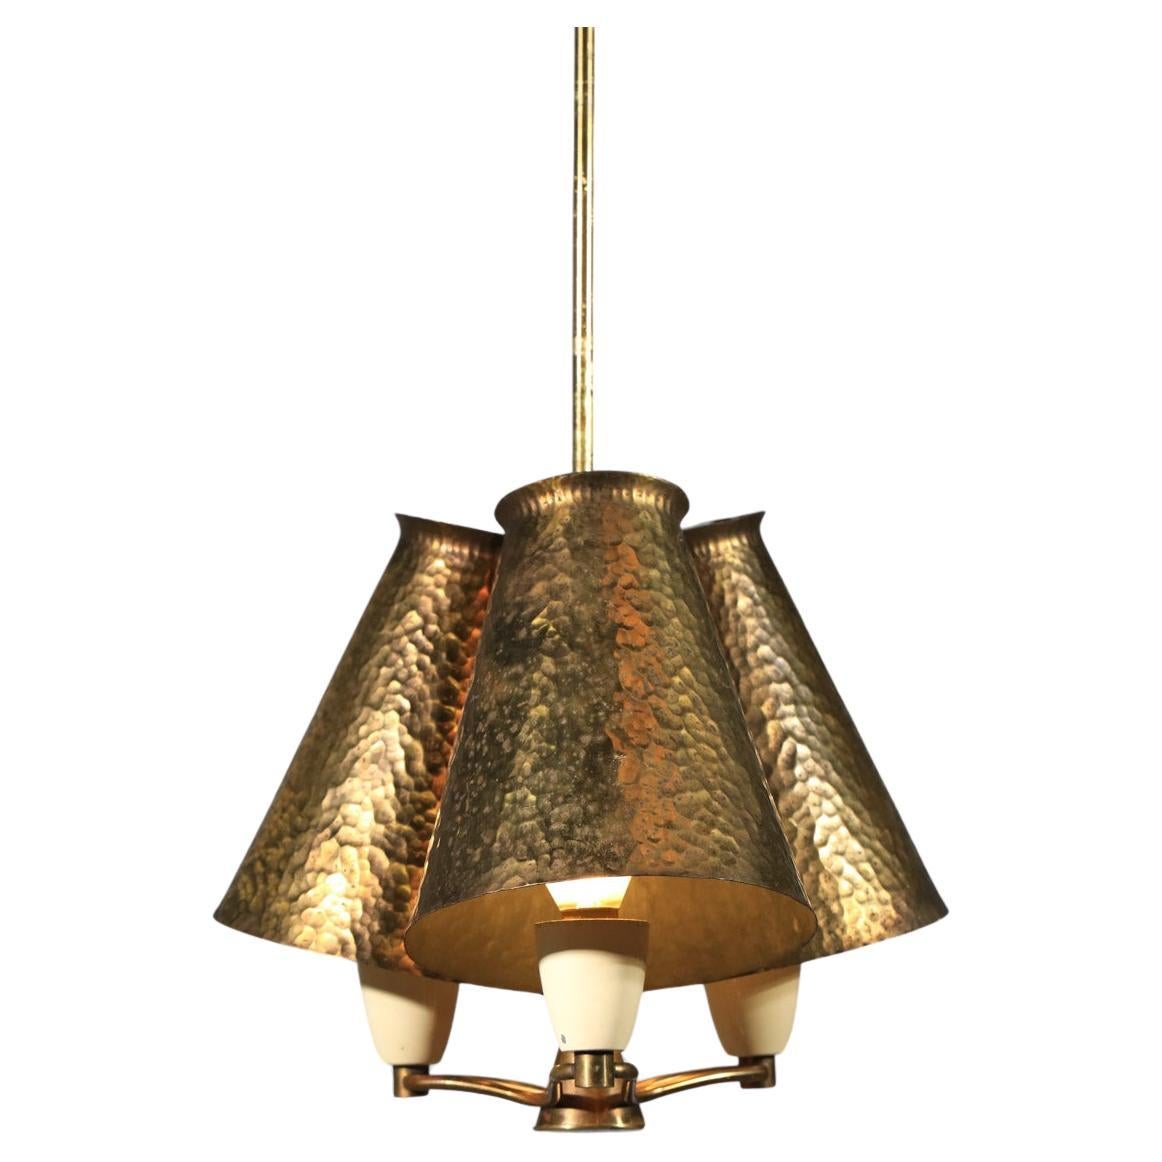 Small Italian pendant chandelier in brass-plated zinc from the 1950s